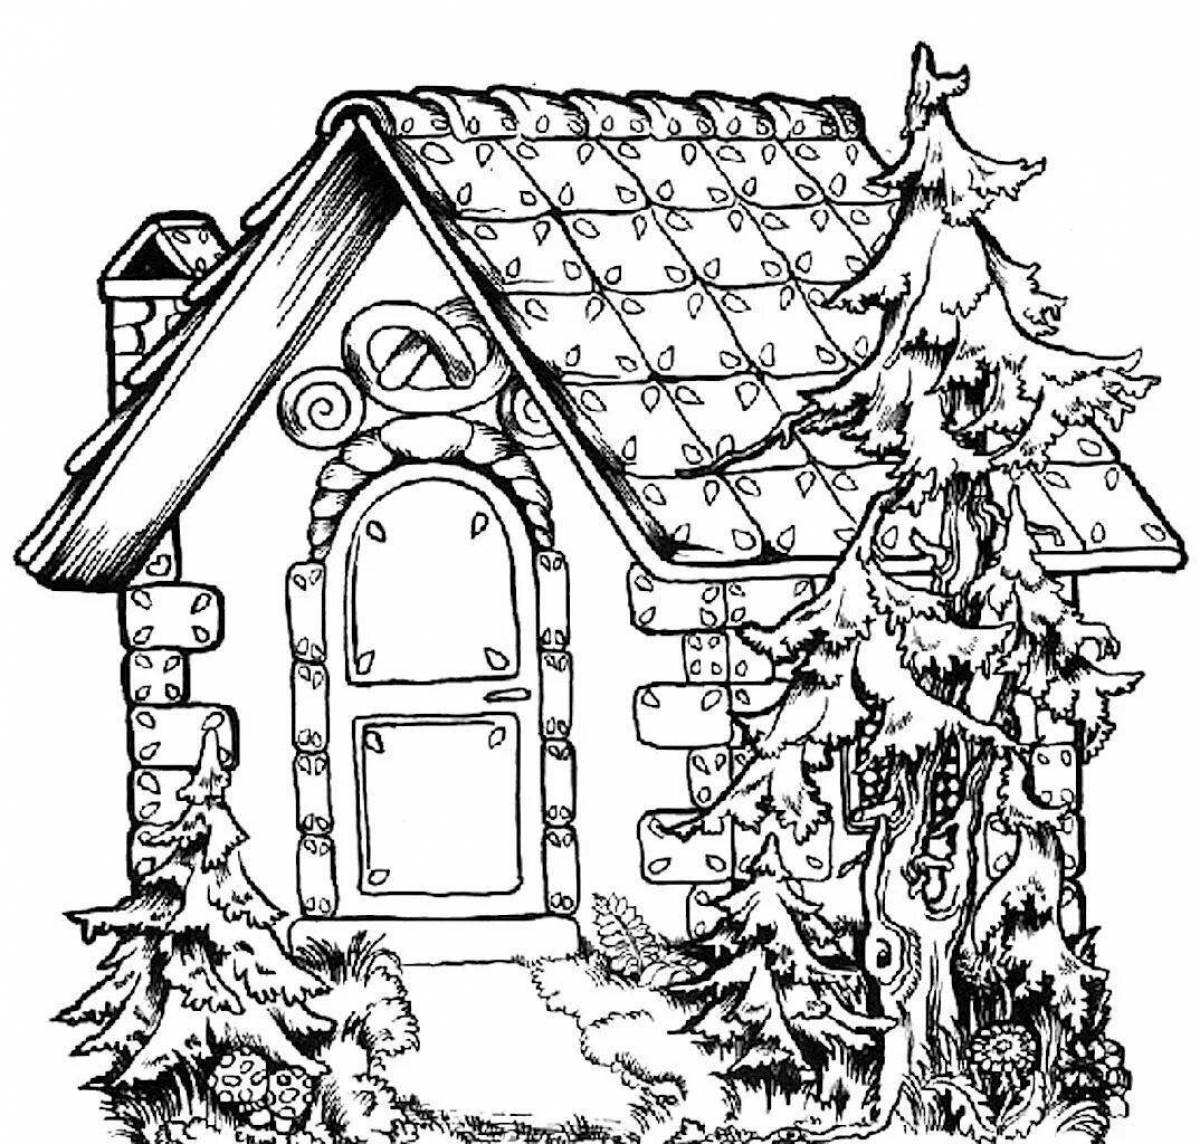 Fairy hut playful coloring